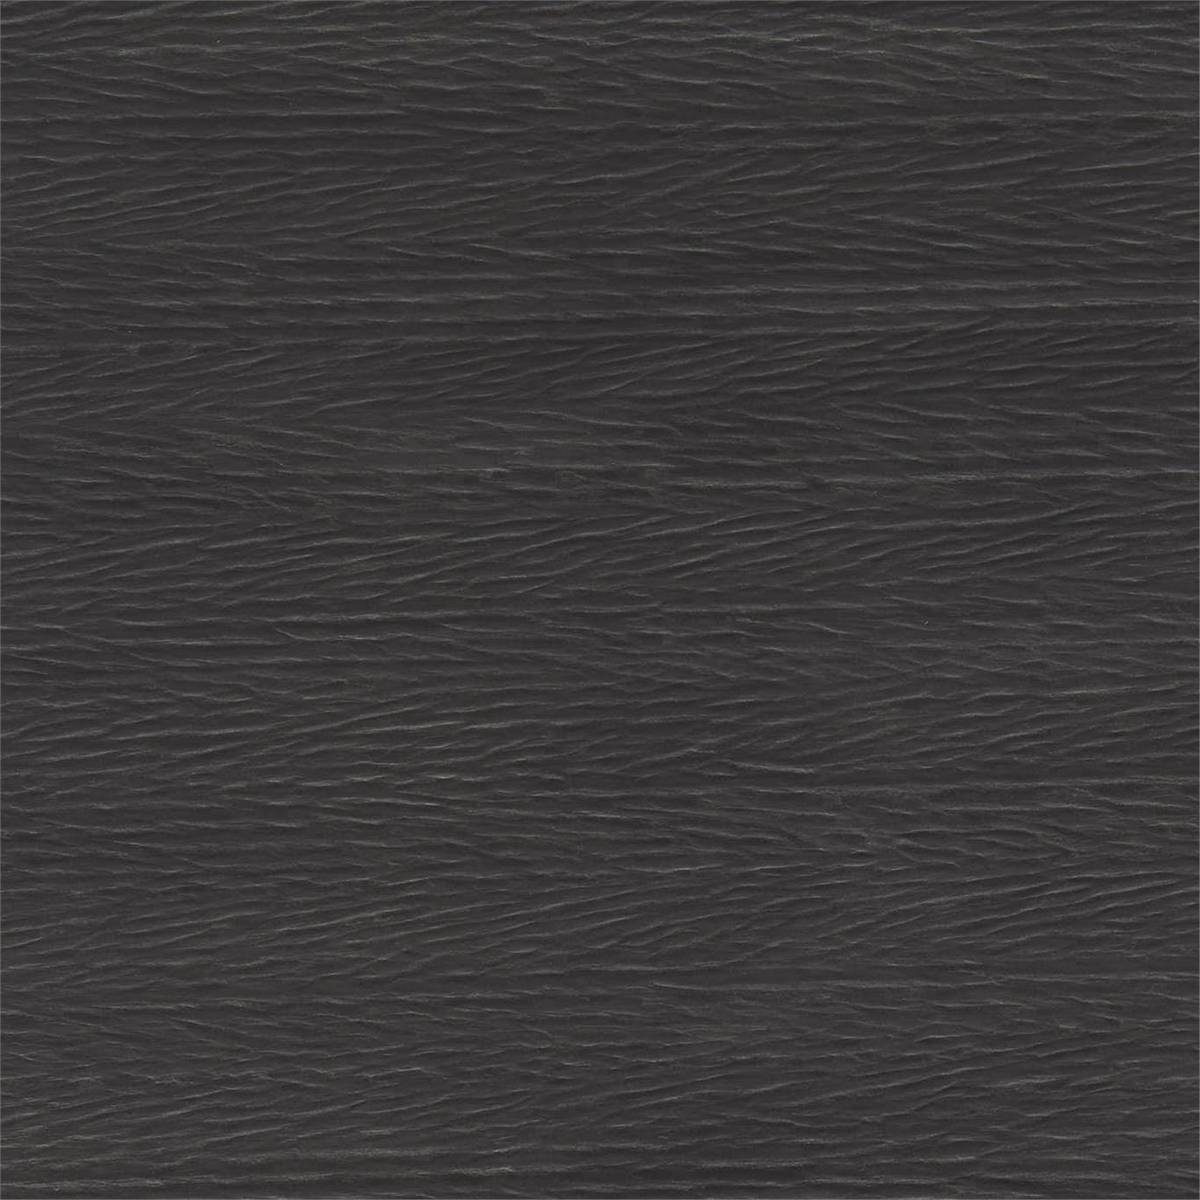 Florio Slate Fabric by Harlequin